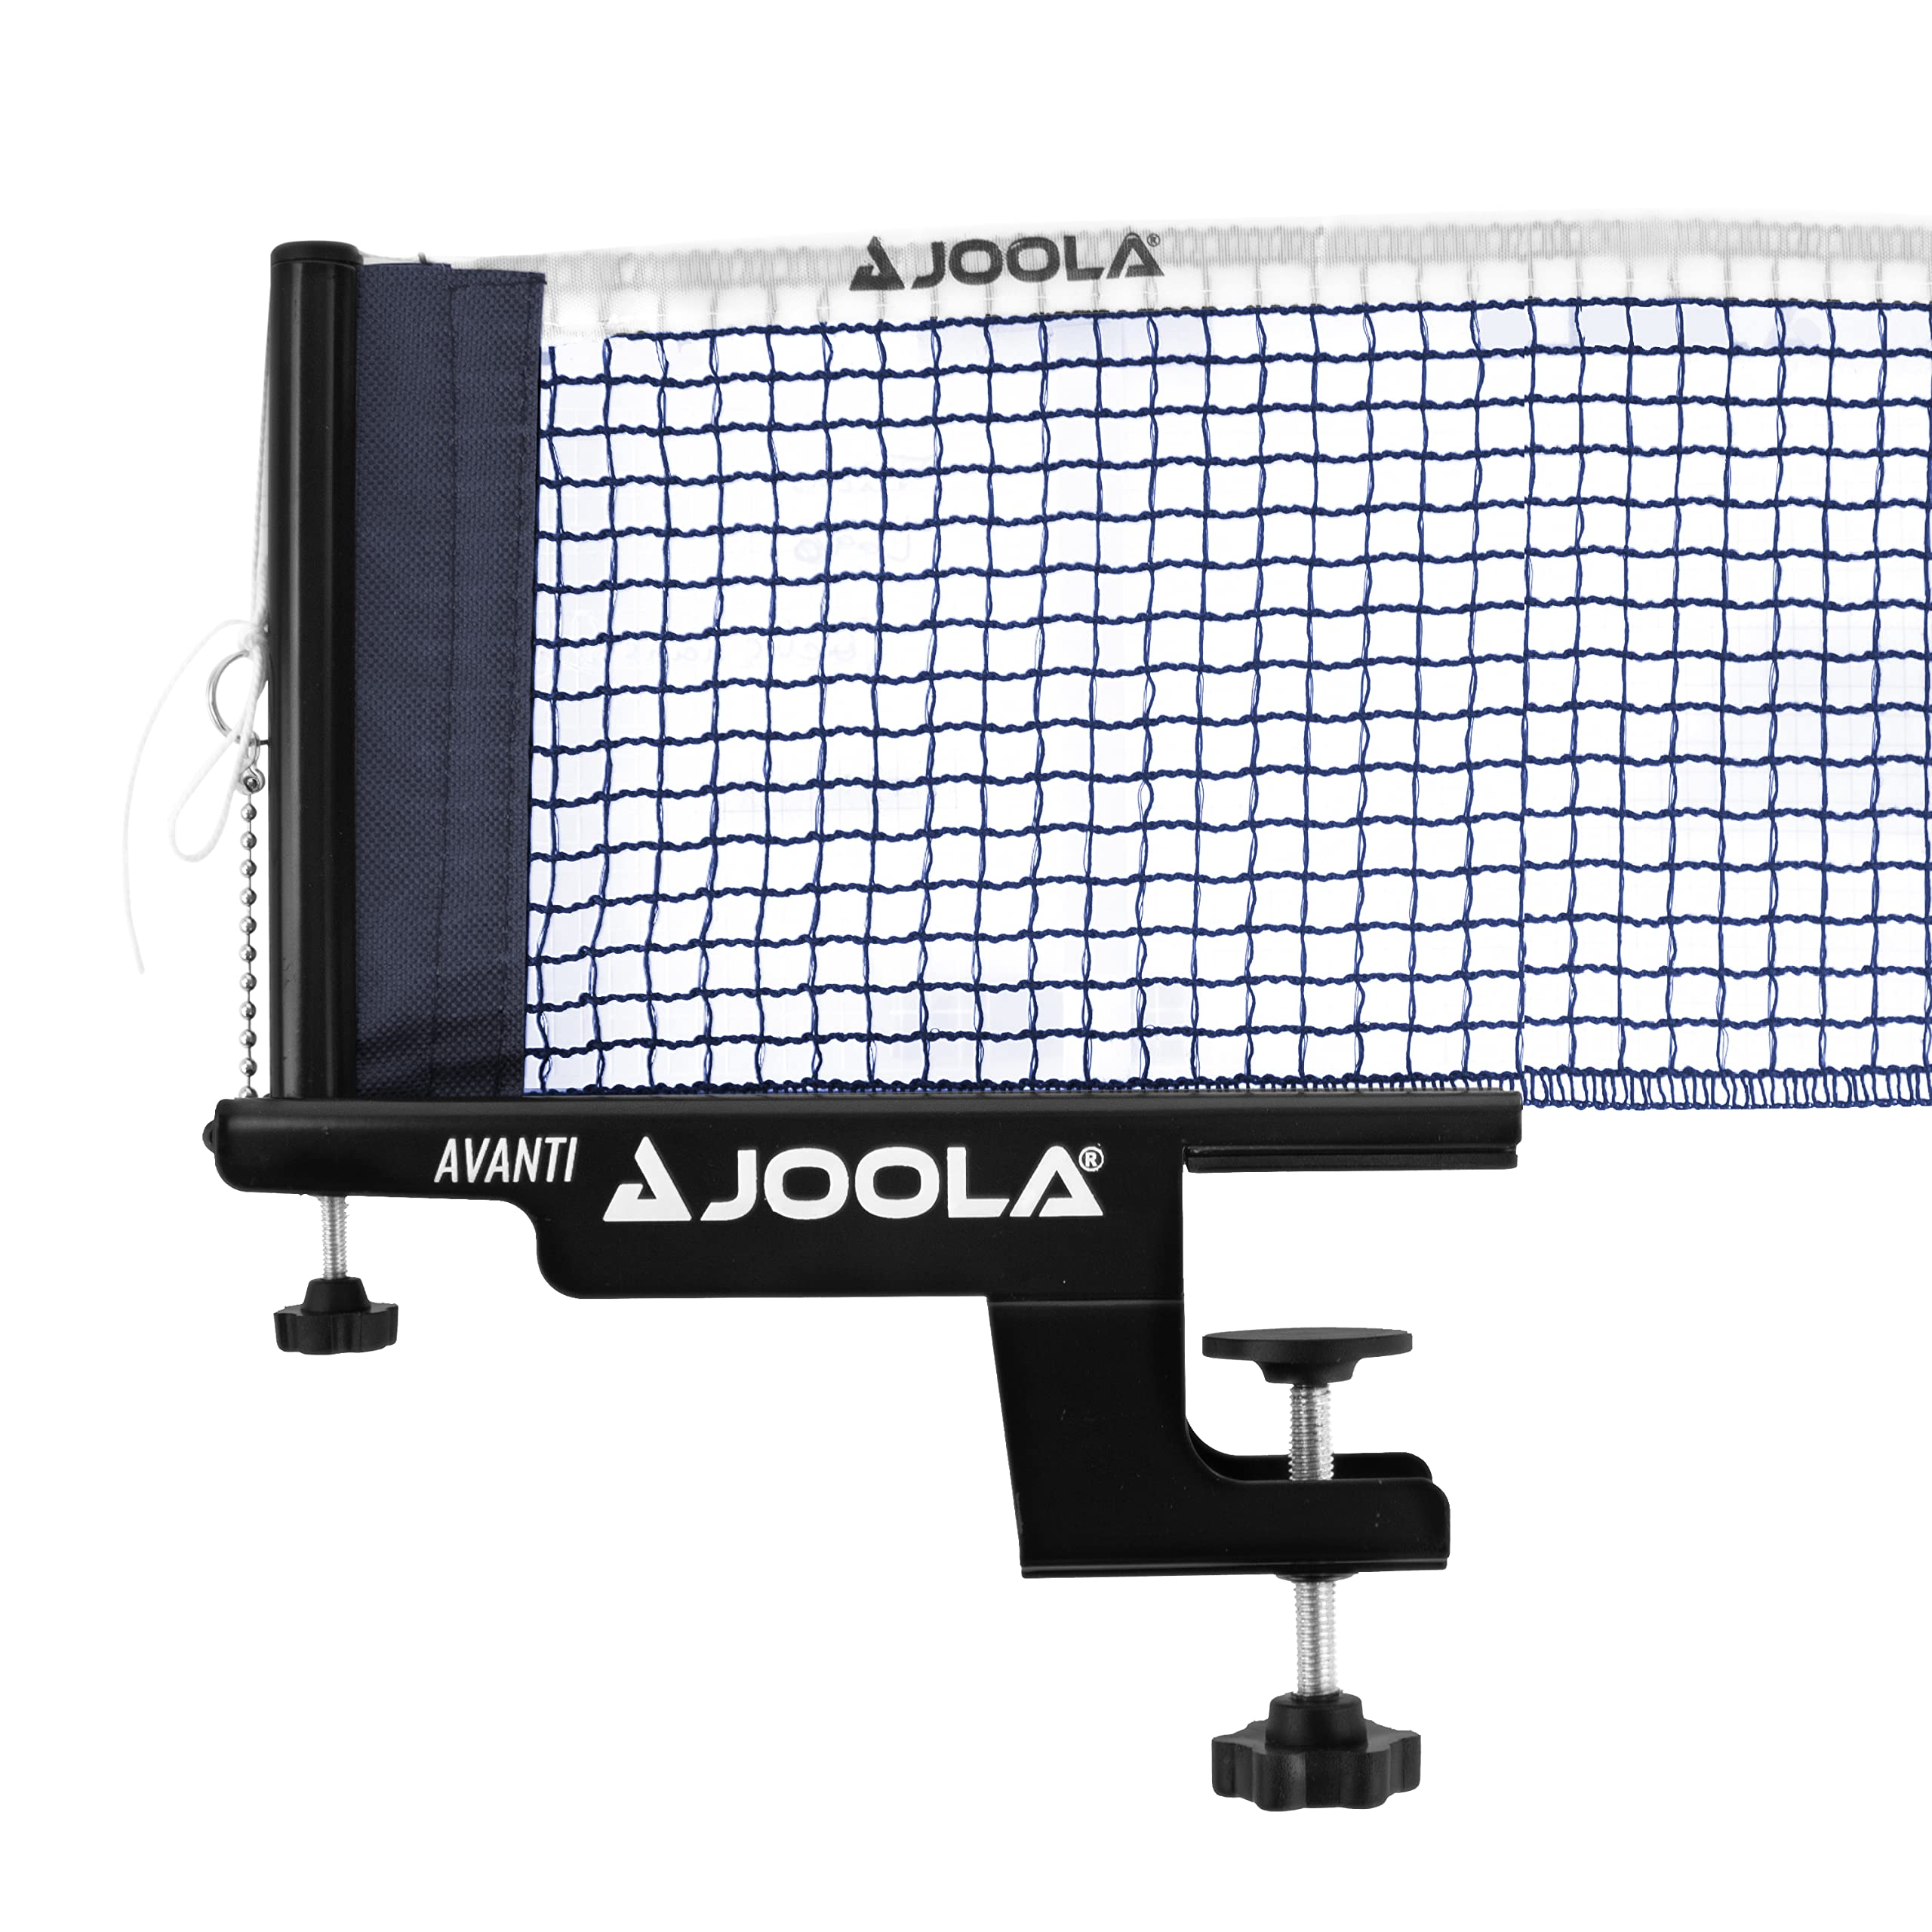 JOOLA Premium Avanti Table Tennis Net and Post Set - Portable and Easy Setup 72" Regulation Size Ping Pong Screw On Clamp Net, W